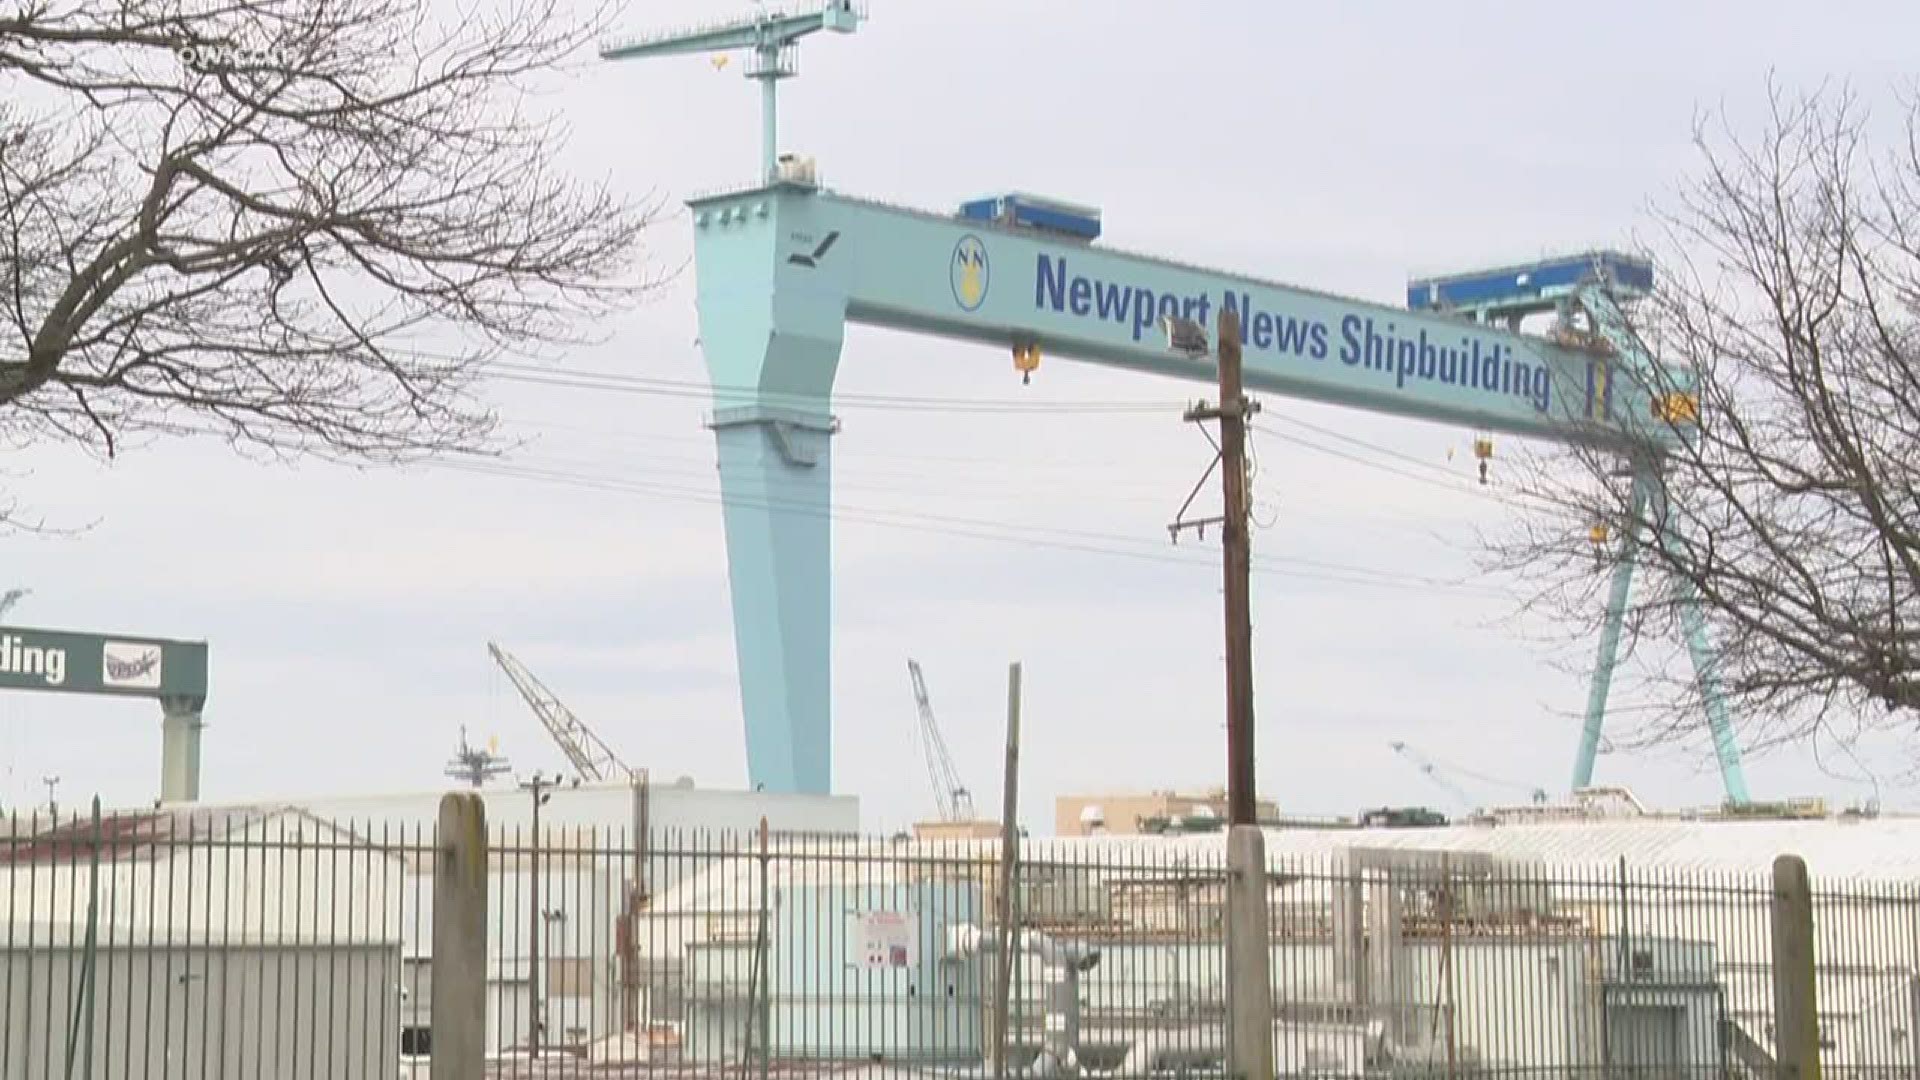 Newport News Shipbuilding announced it is withdrawing from OSHA's voluntary protection program